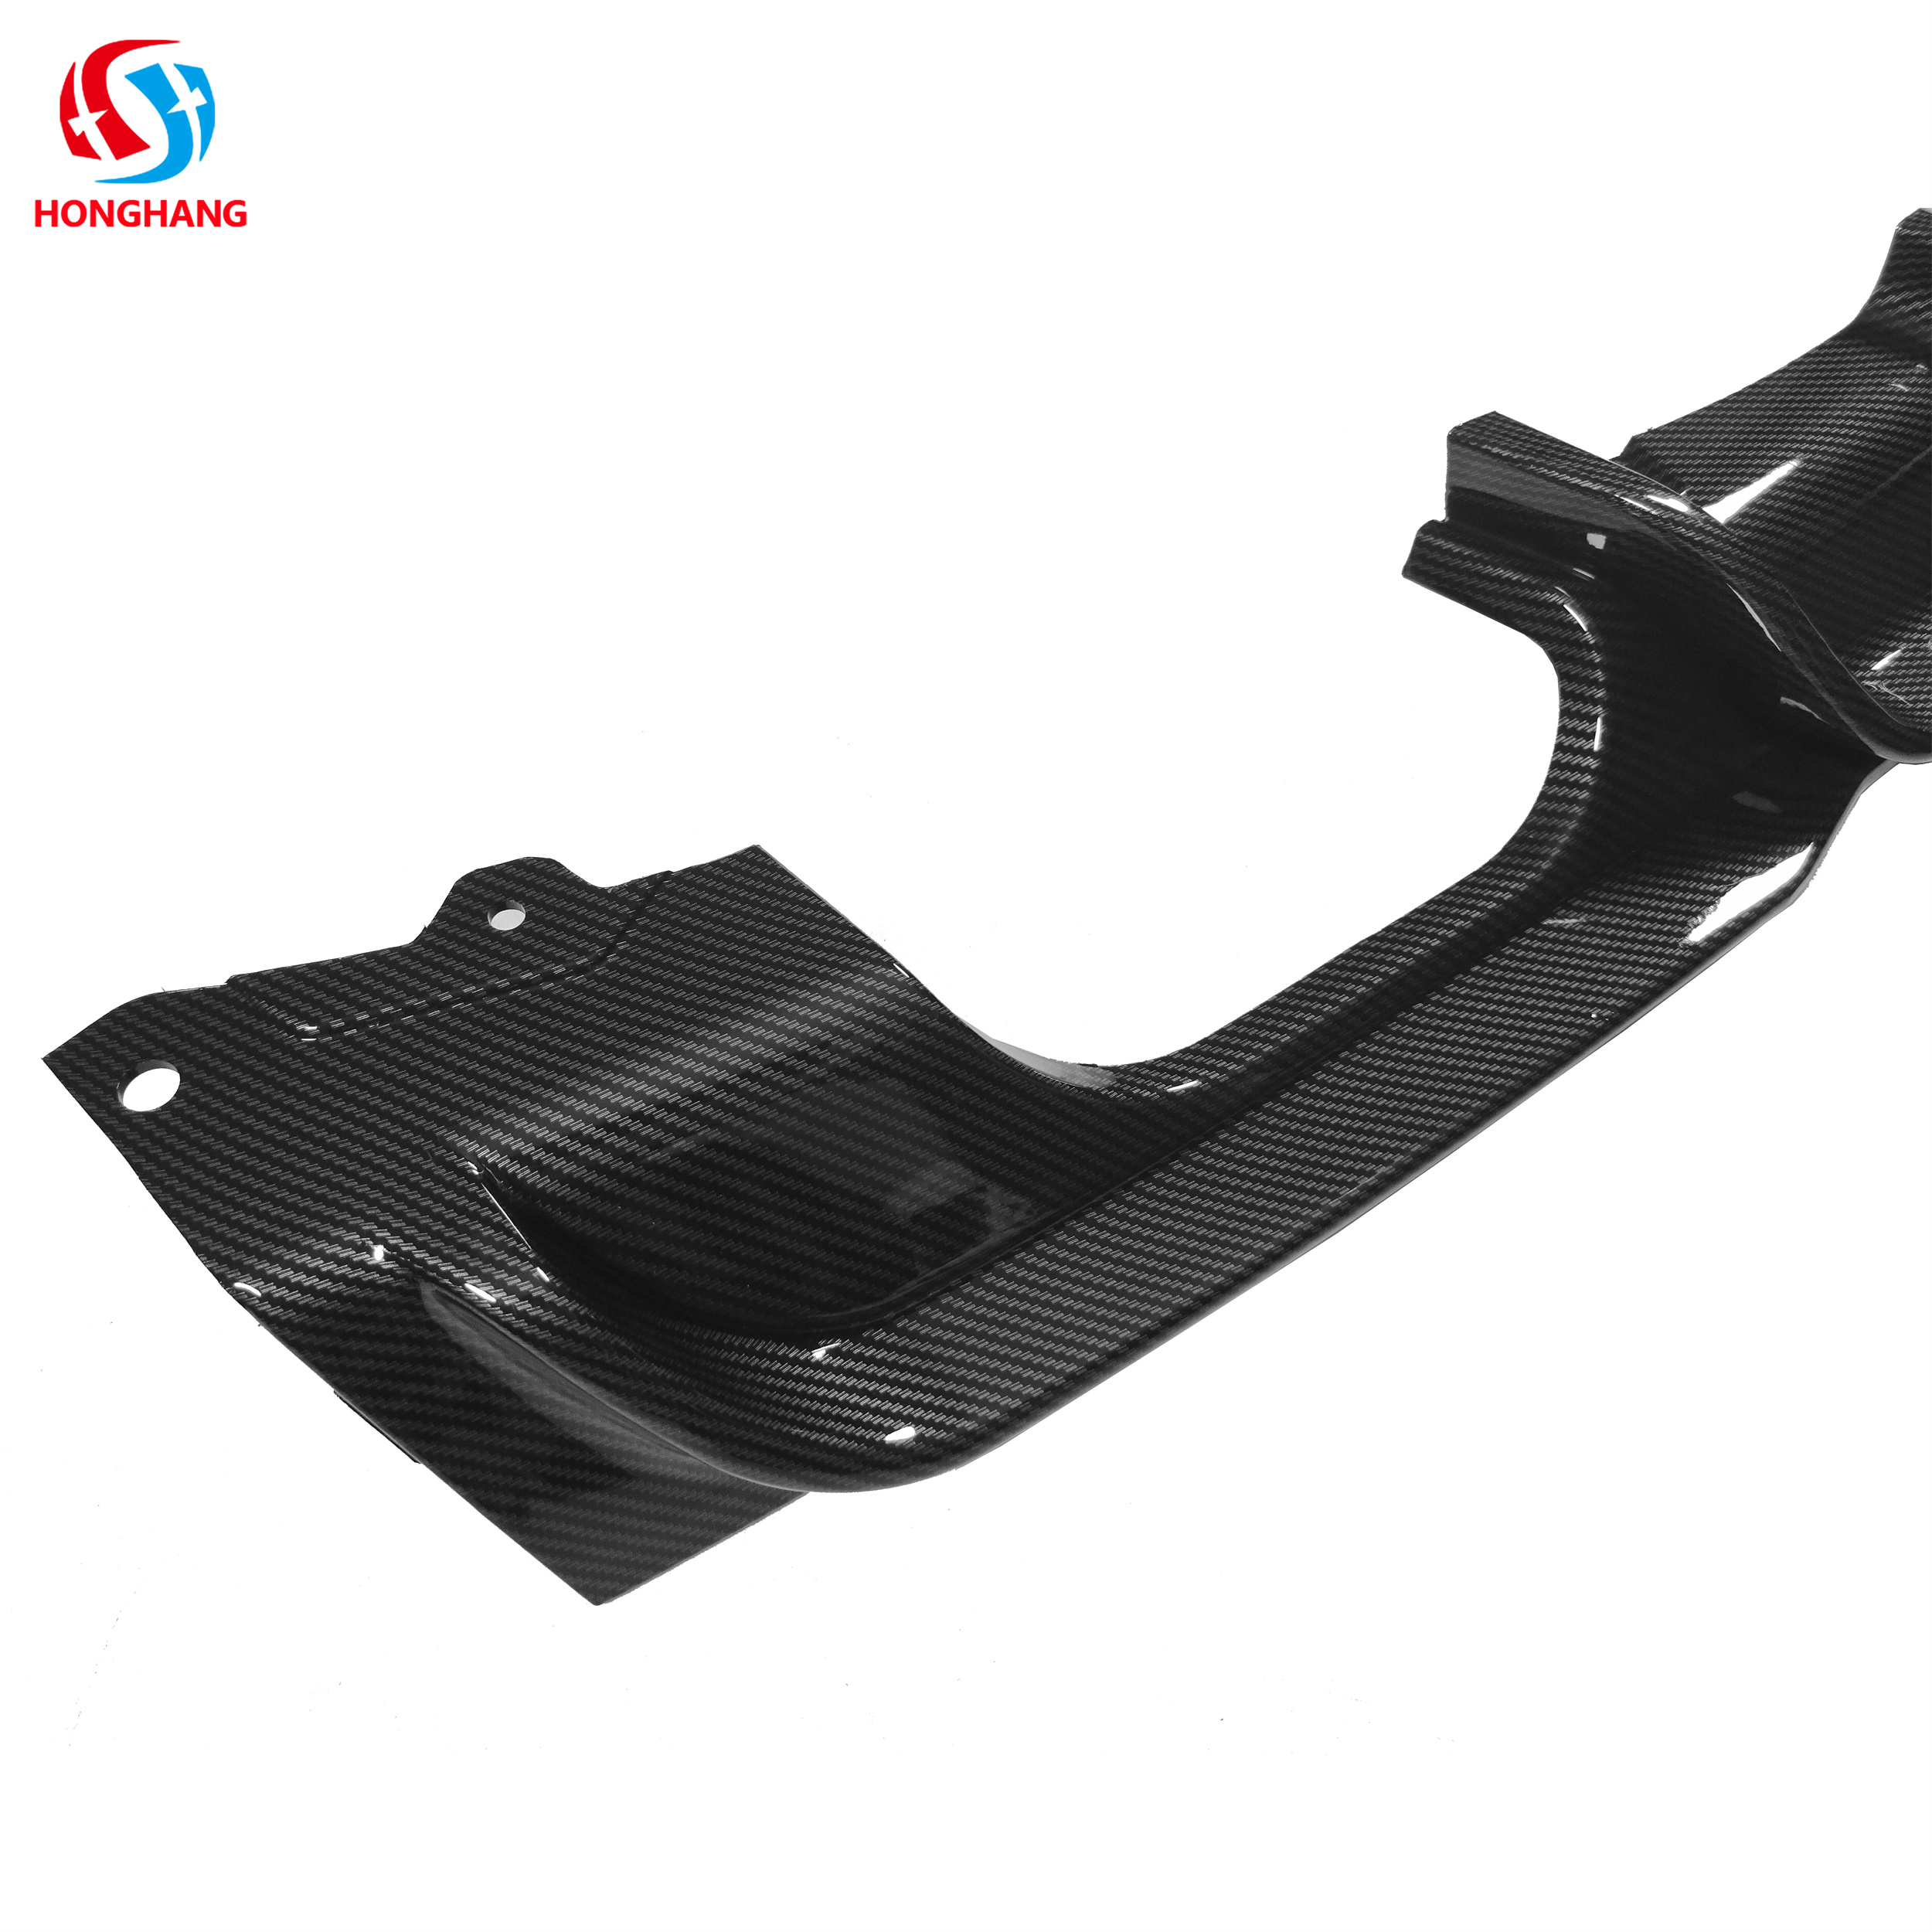 Water Transfer Printing Bilateral Double Row Rear Diffuser for Bmw 3 Series F30 